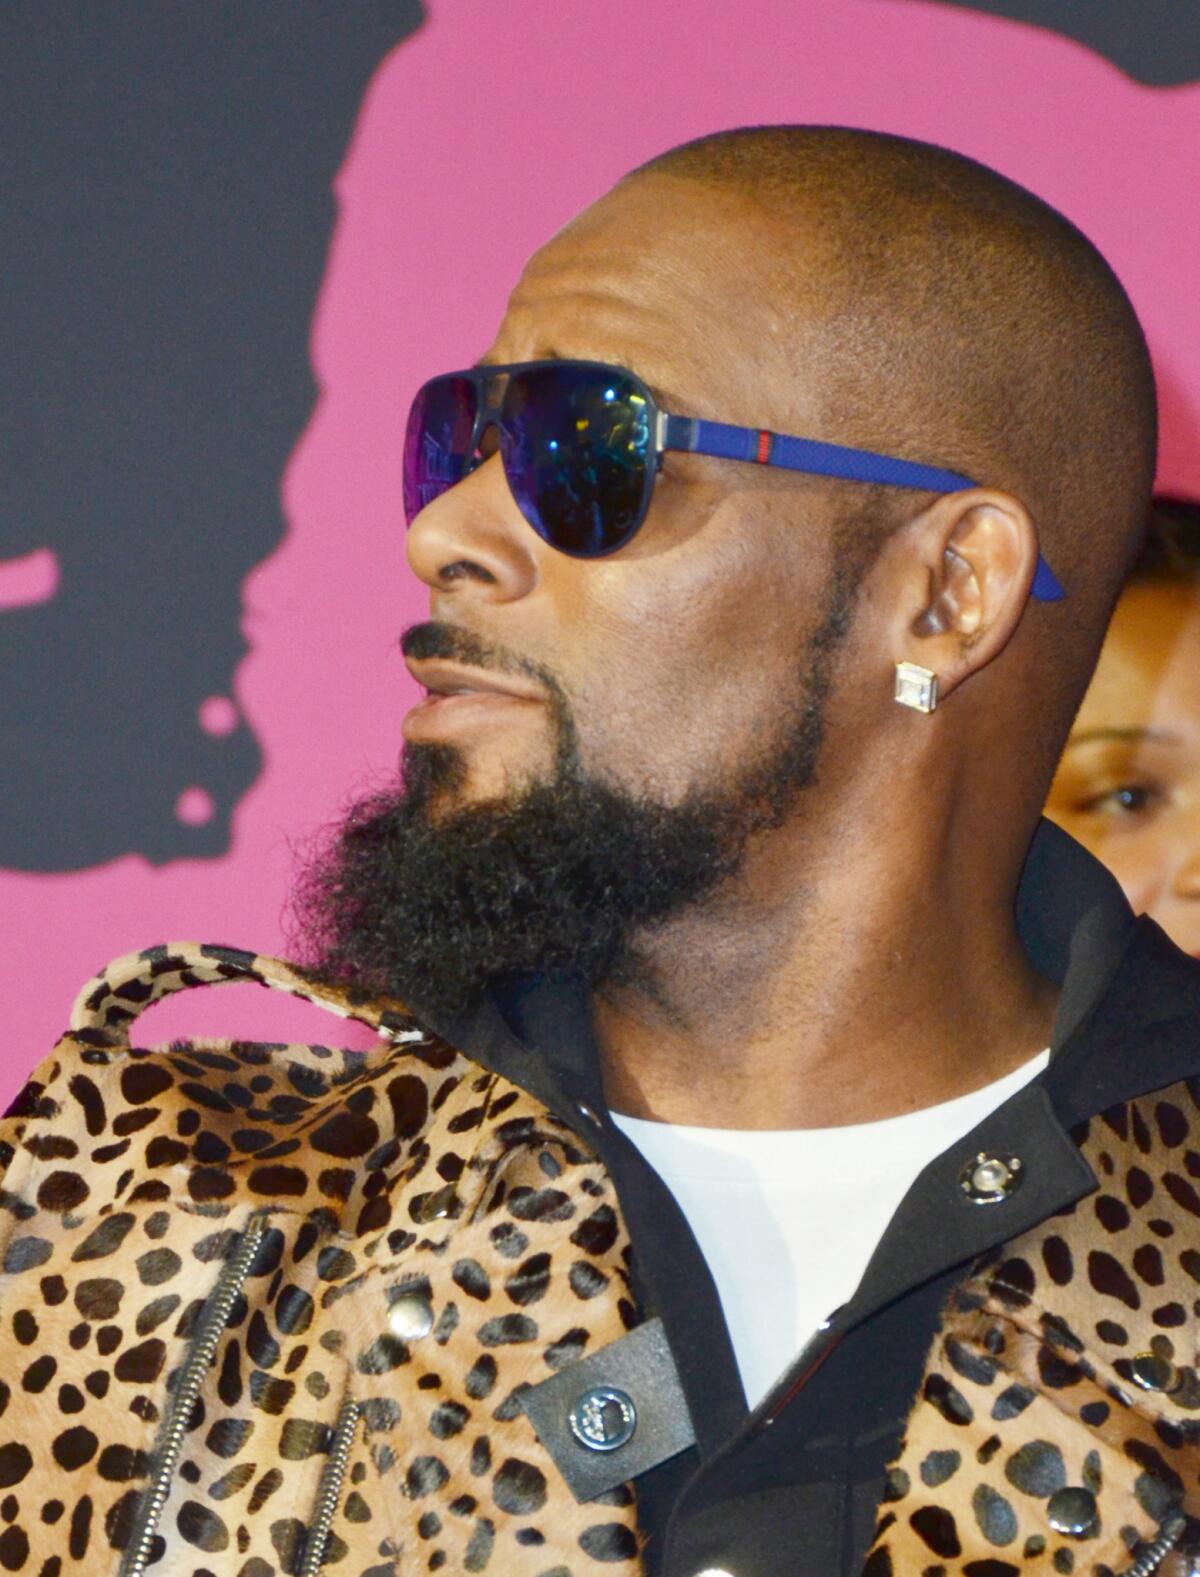 R. Kelly will be the subject of another Lifetime docuseries.